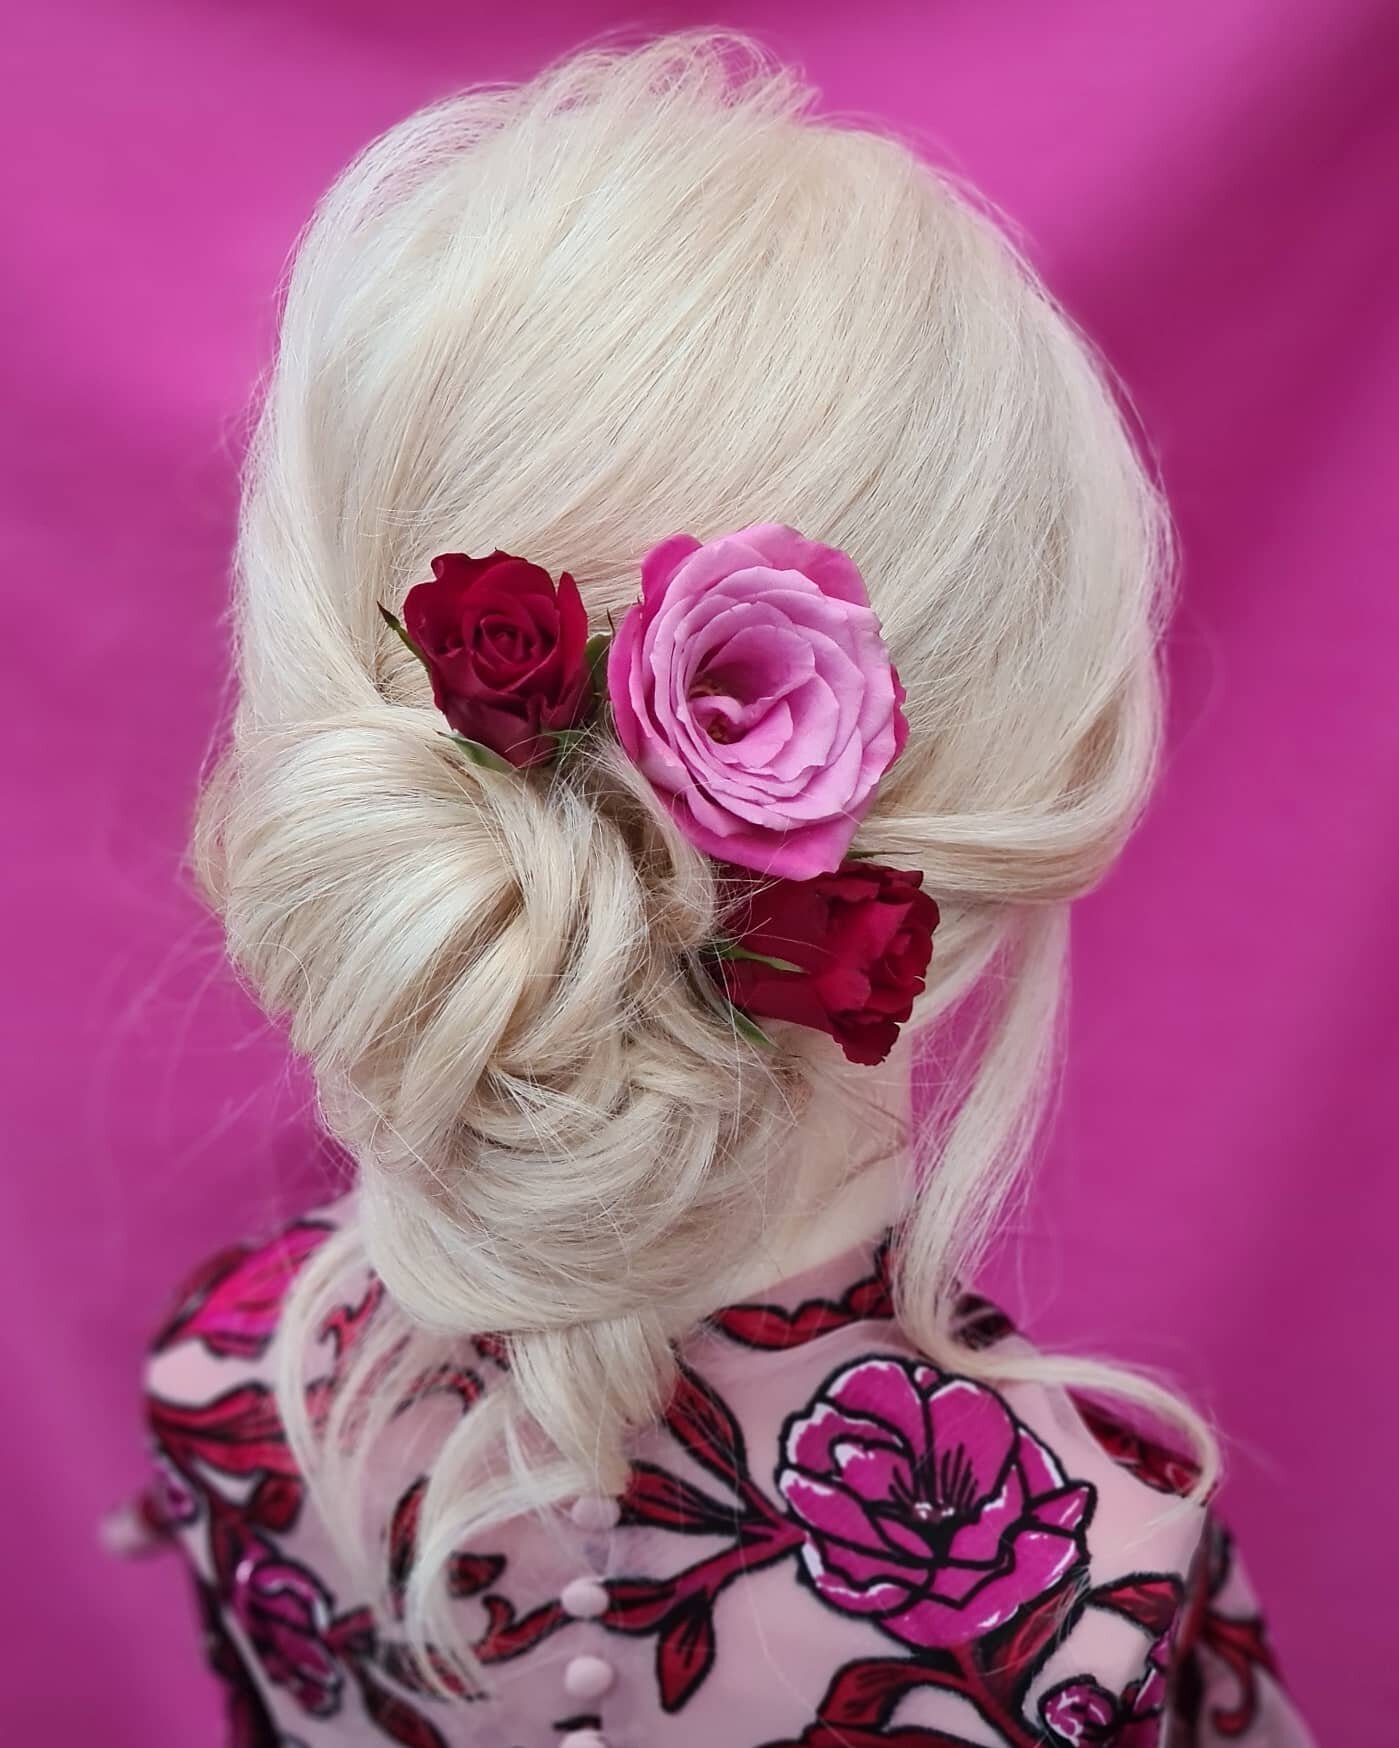 ⚘VALENTINE'S DAY ⚘I love it &amp; can't wait! It's something to look forward to amongst all this doom &amp; gloom 💘 now we're officially in the month of love I can share Tiffany's Valentine's hairstyles I've been creating the last few weeks! I'm a b